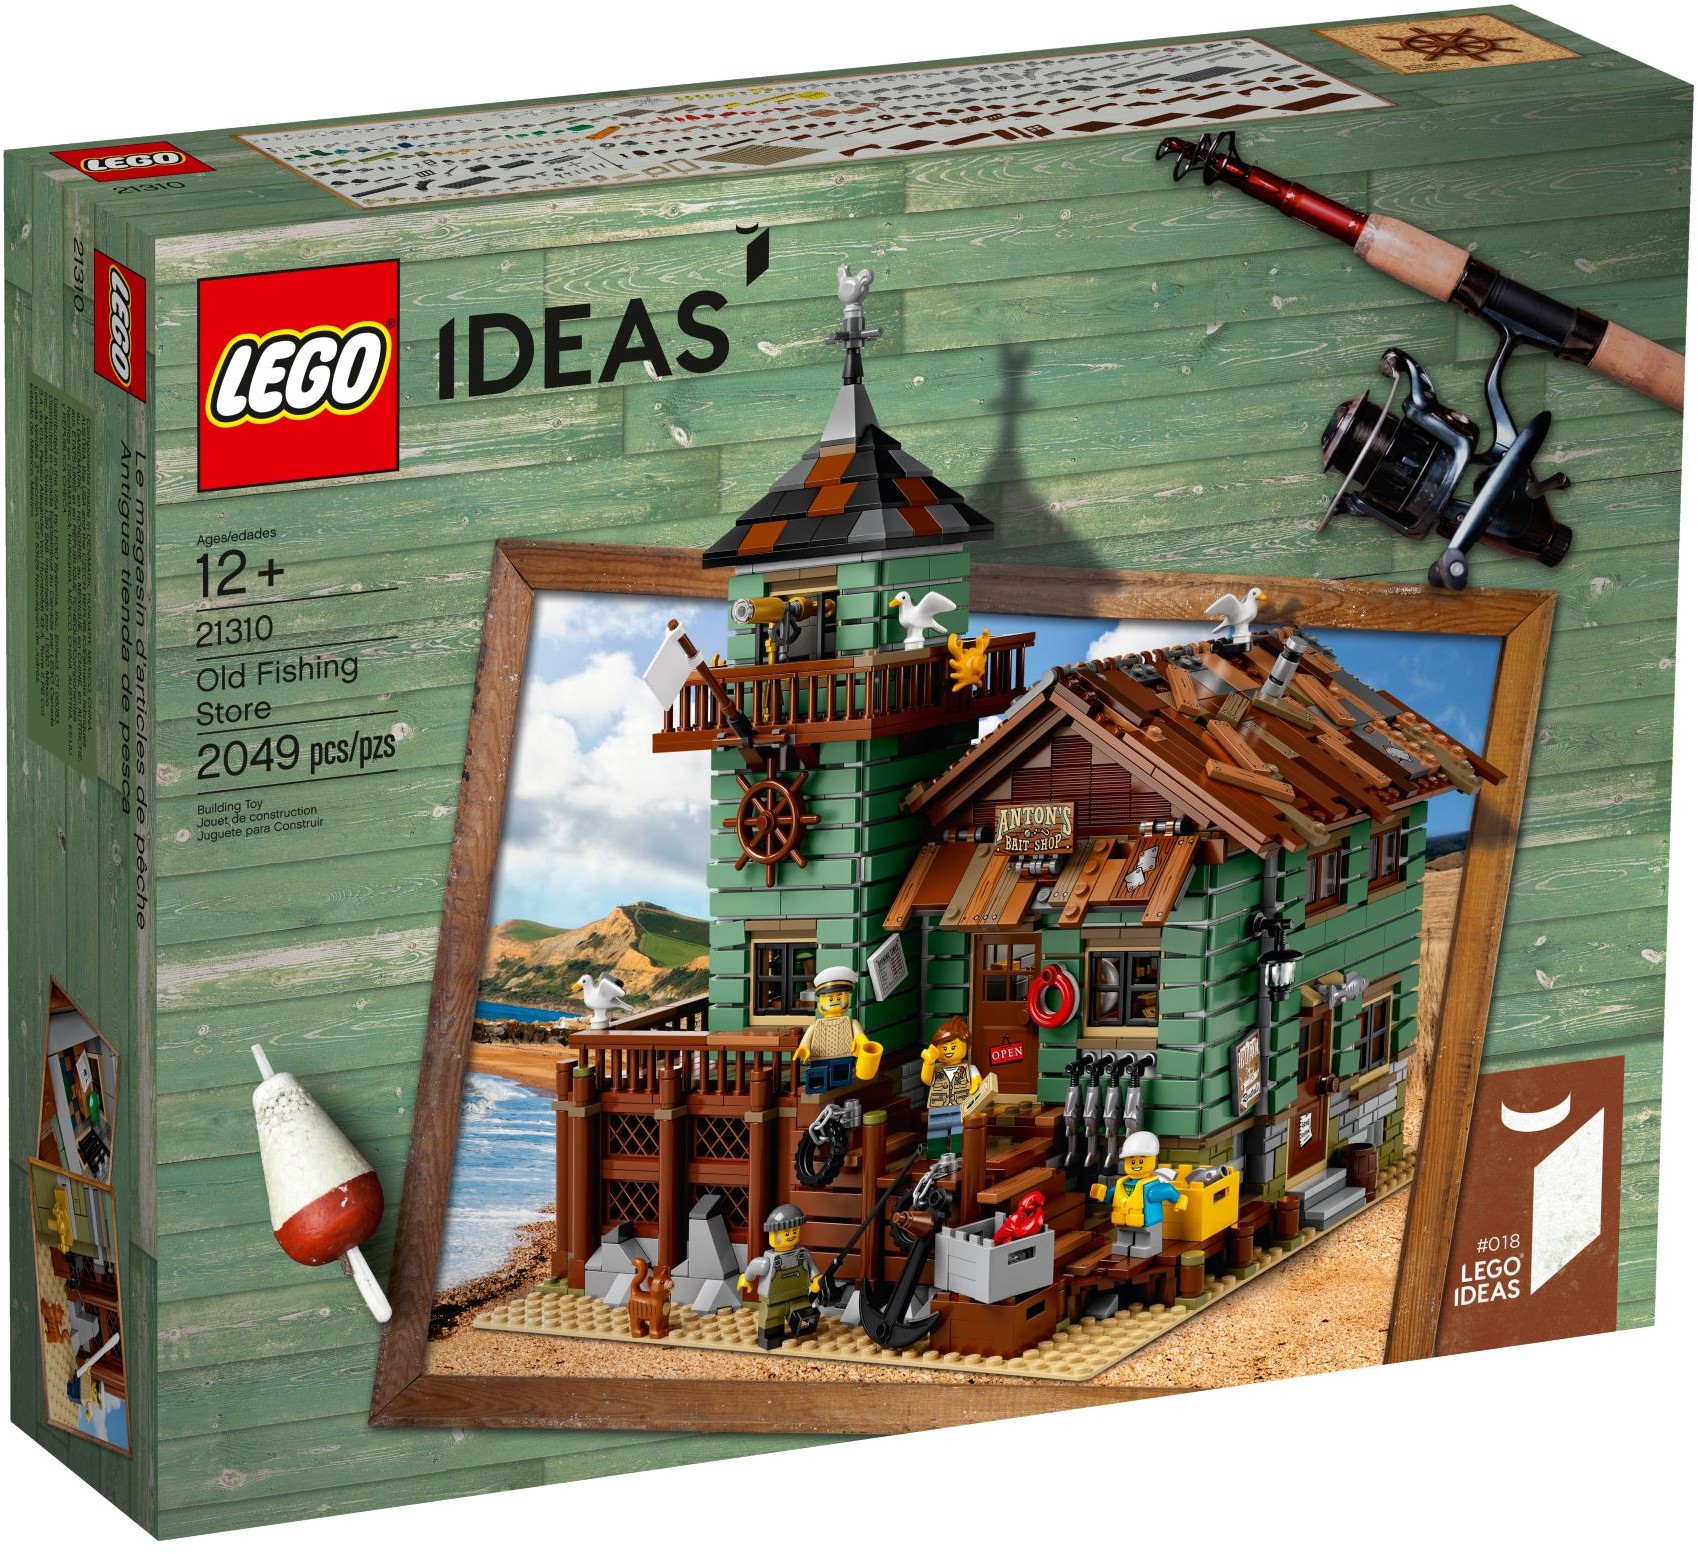 LEGO Ideas - Old Fishing Store